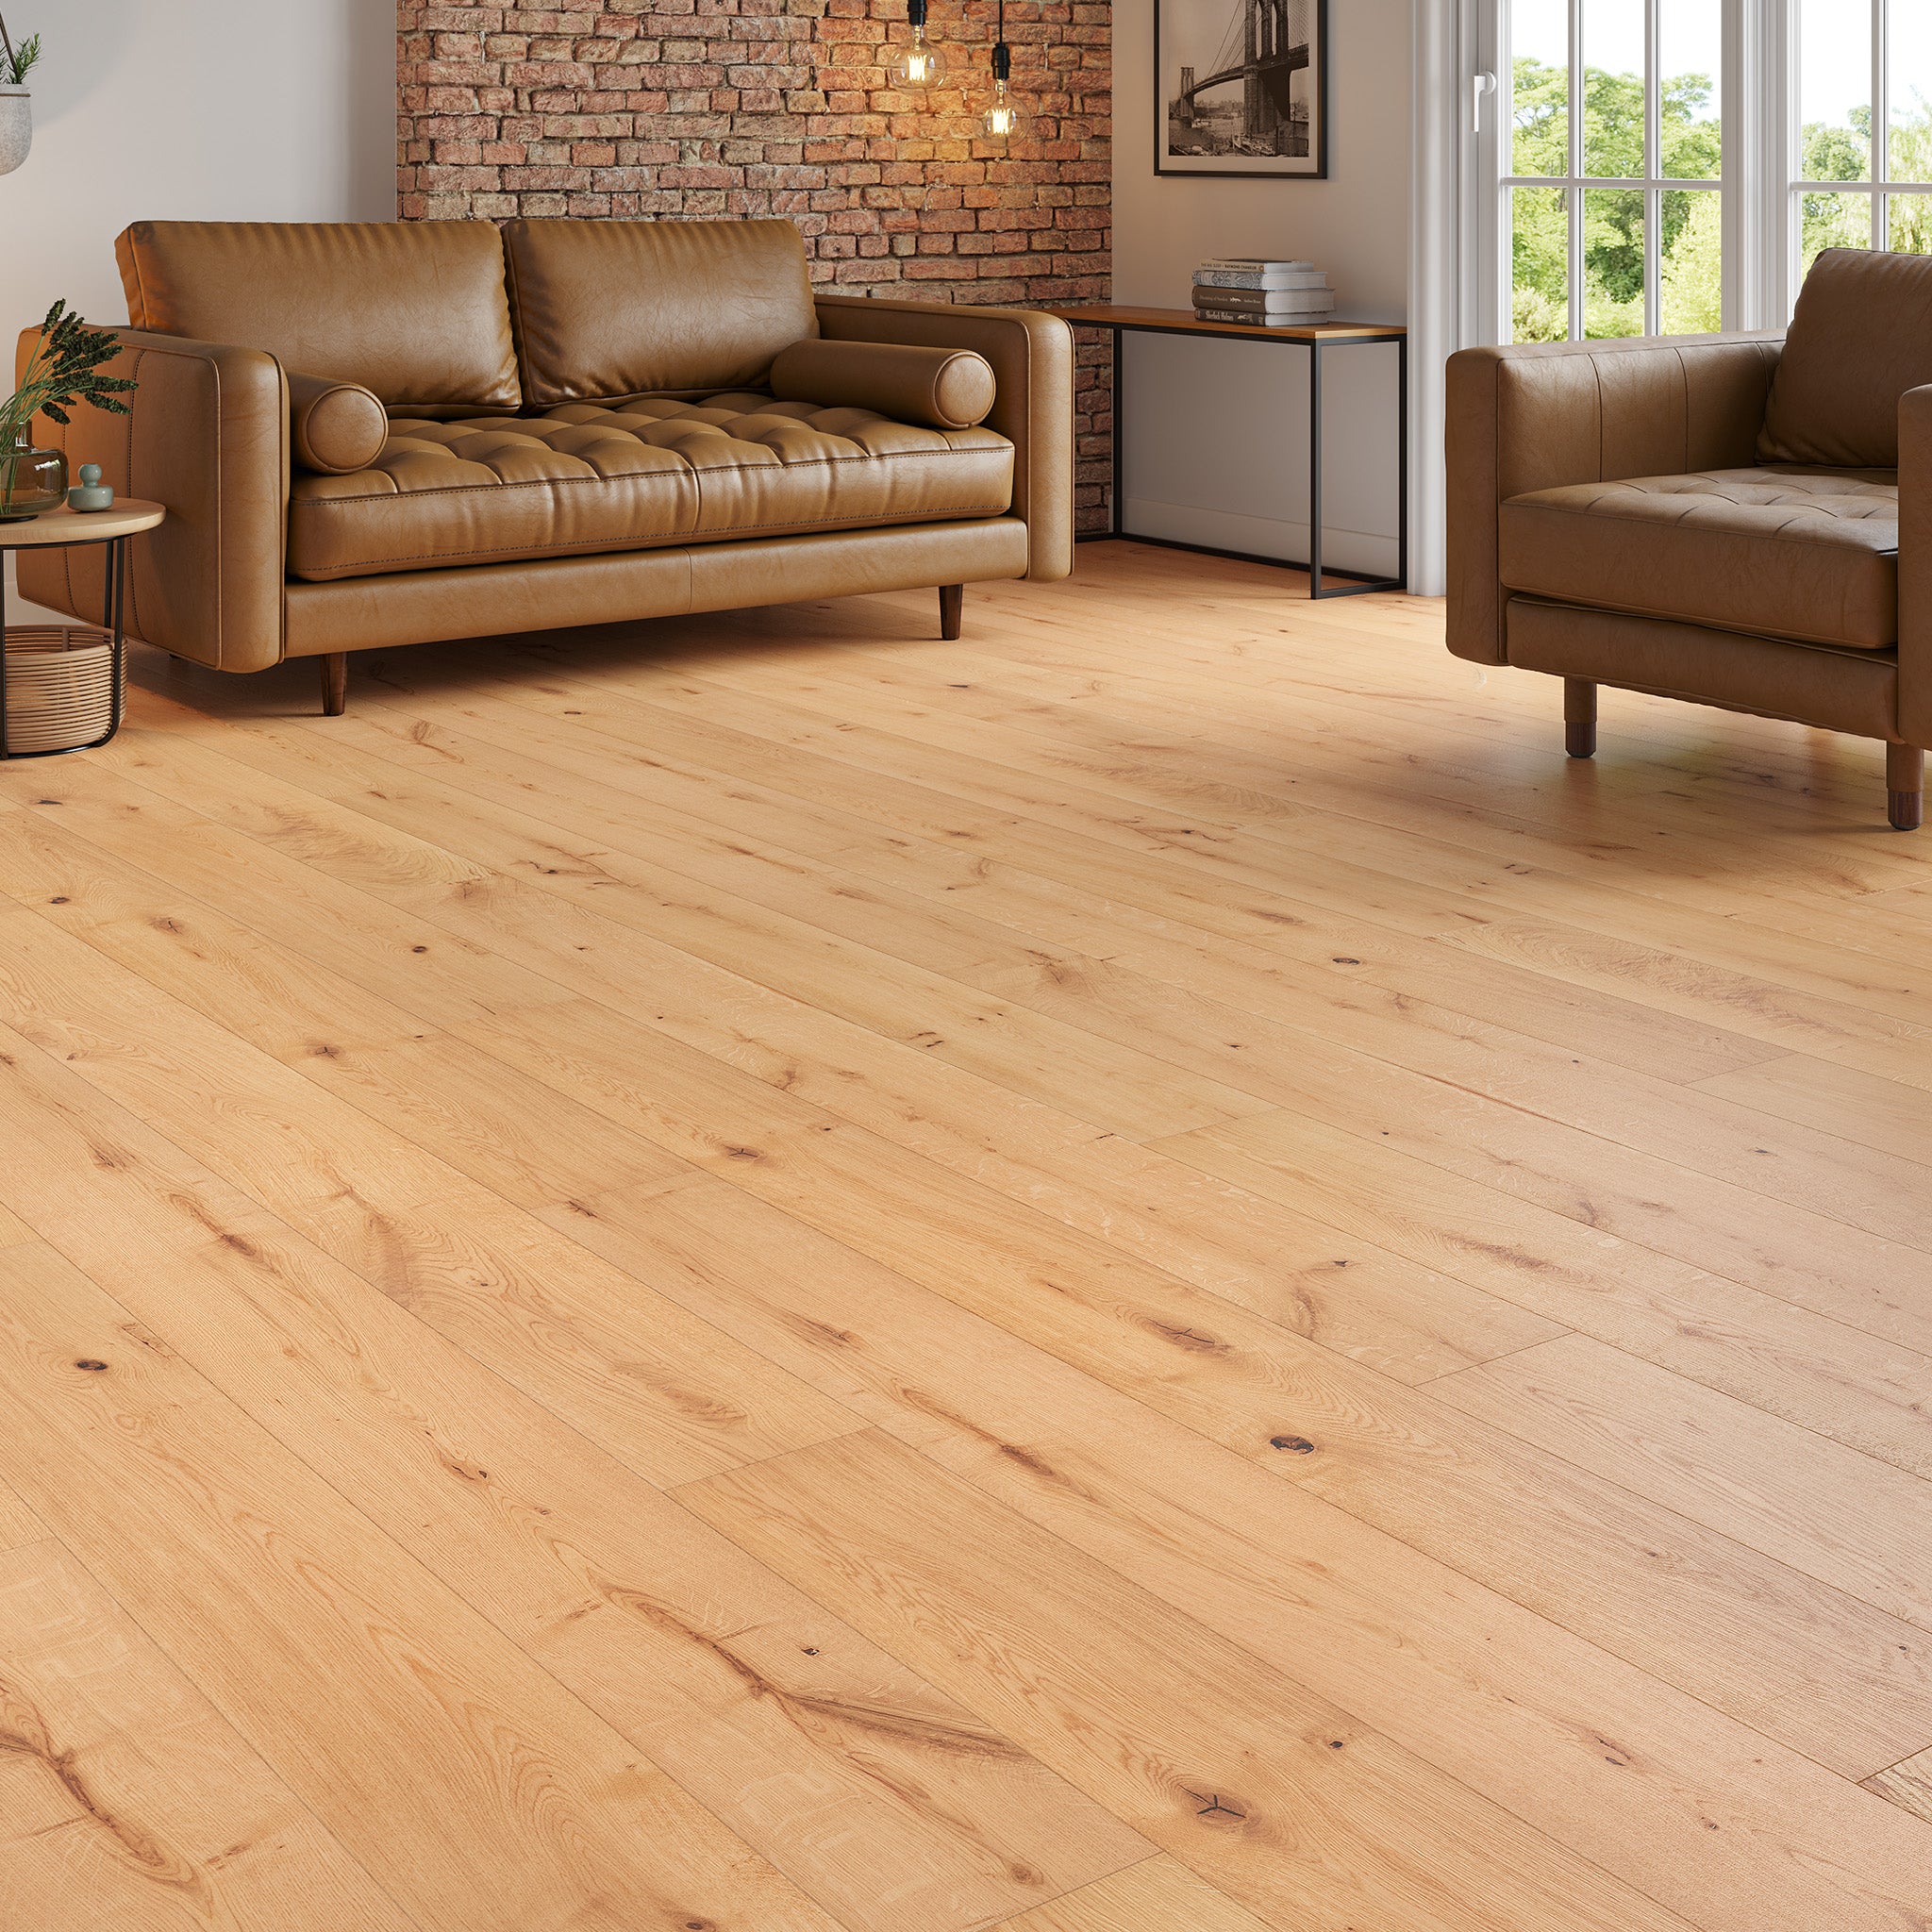 Heather Oak Natural Brushed & Oiled 14/3 x 190mm Straight Engineered